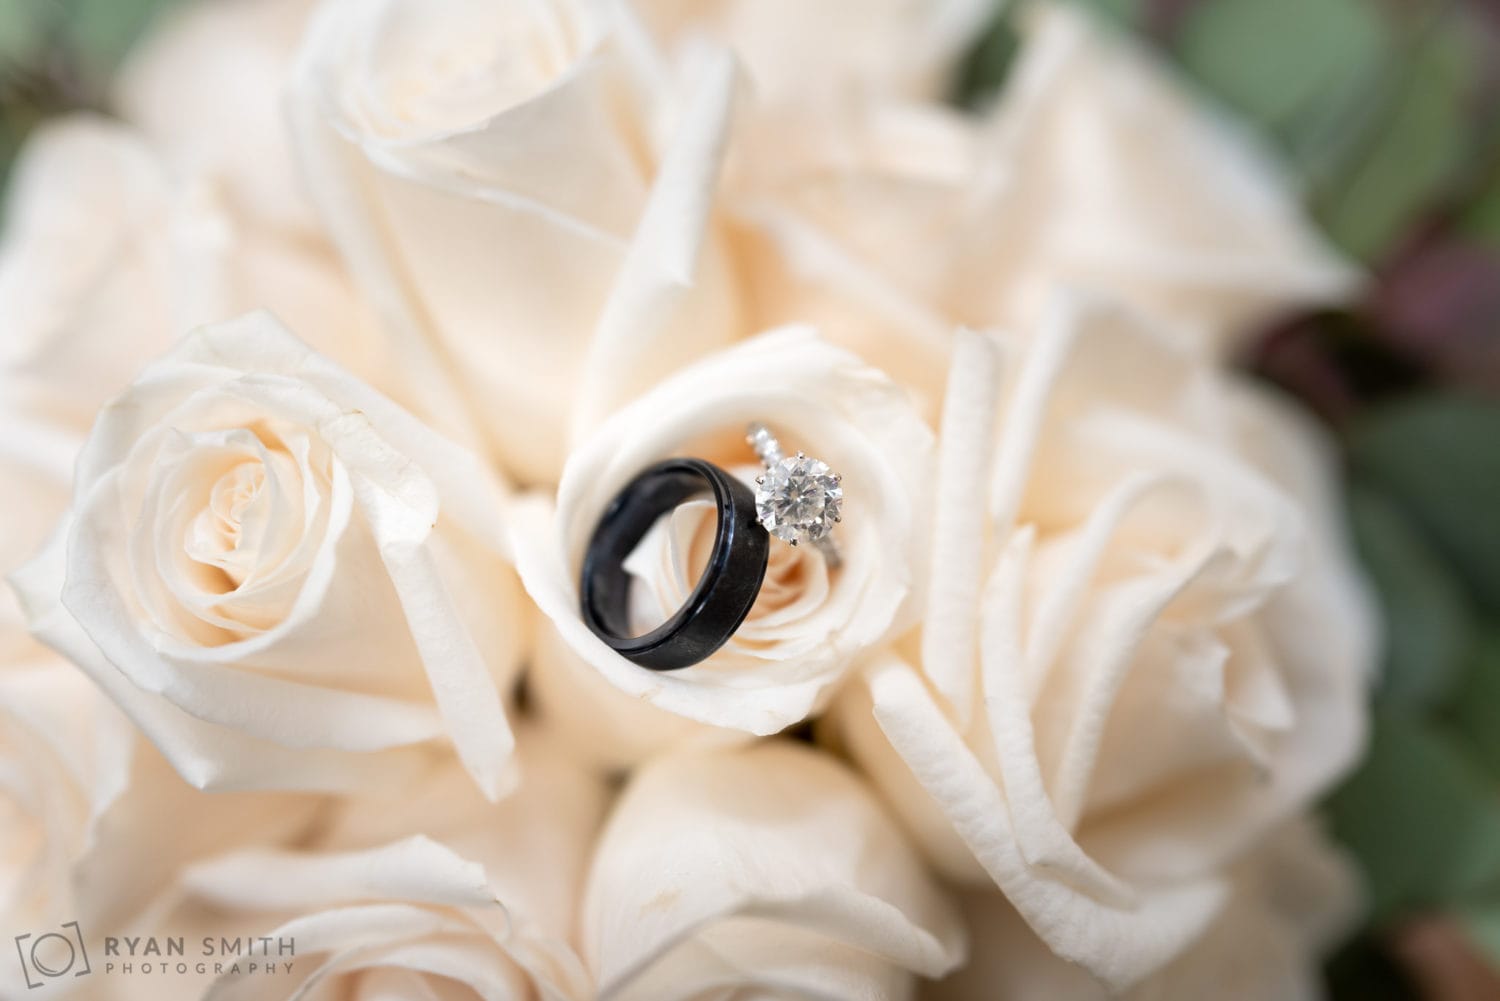 Rings on the bouquet - Wachesaw Plantation